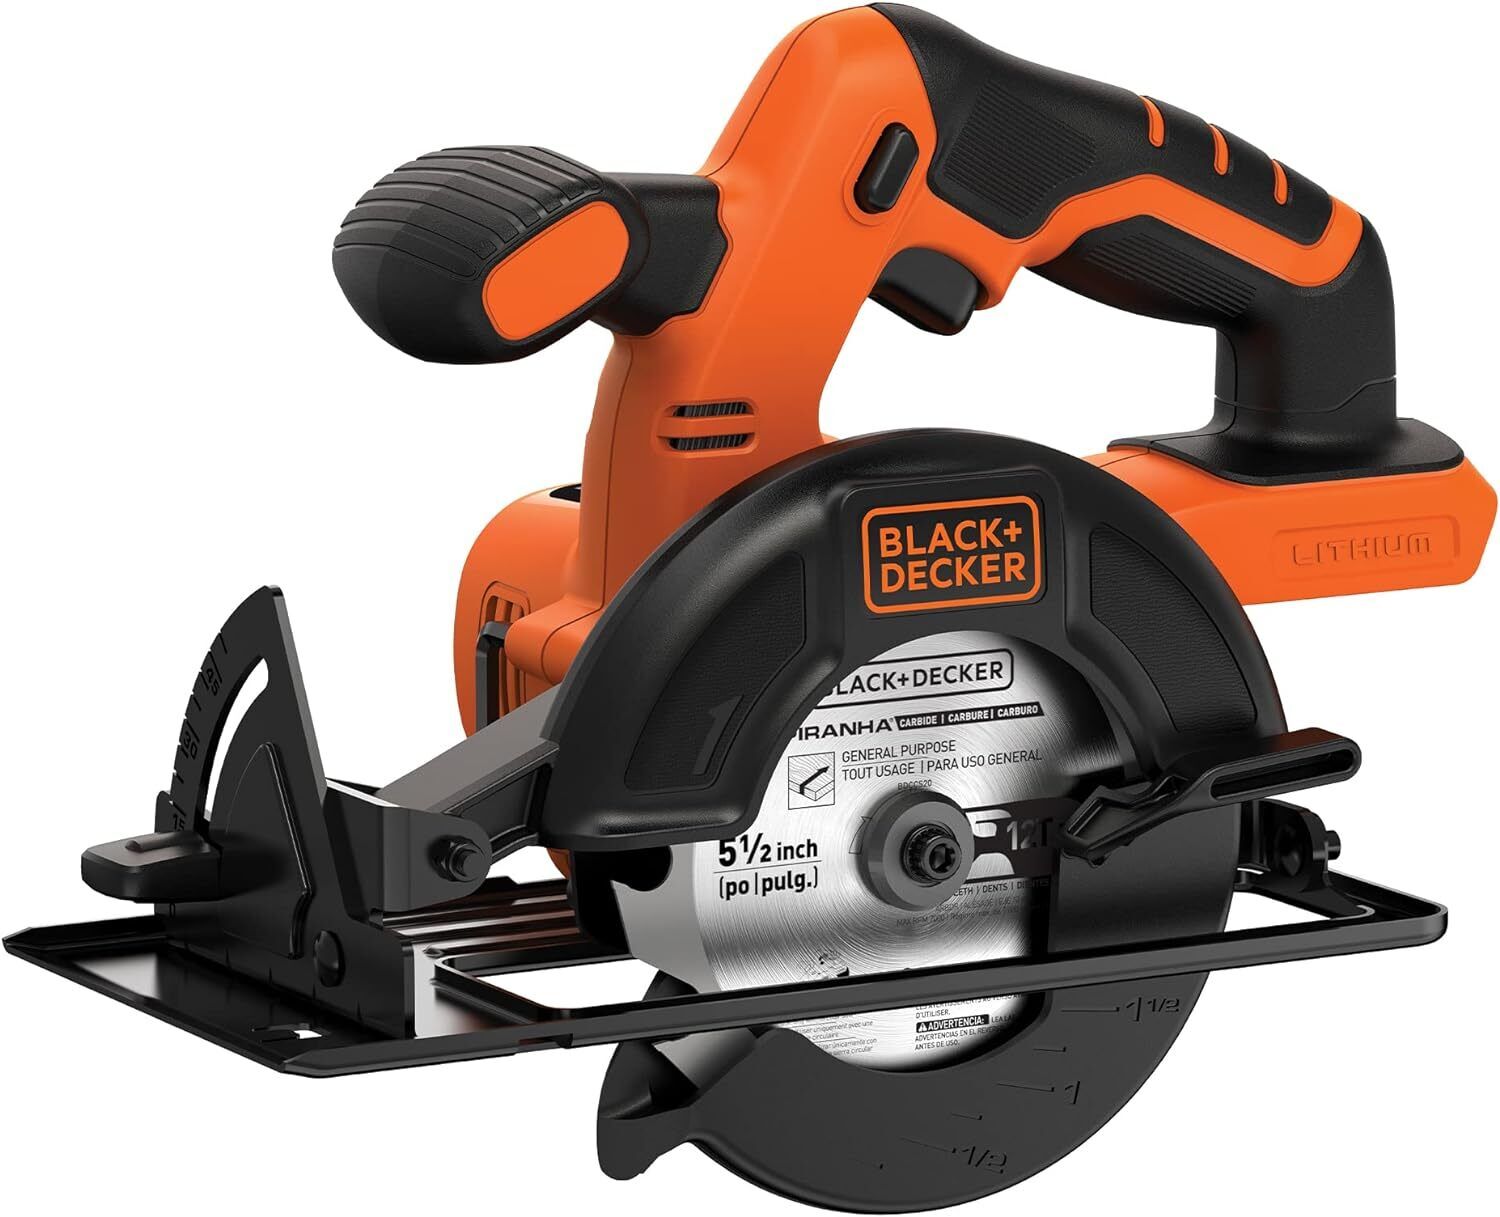 Black And Decker 20-Volt 5-1/2-In Cordless Circular Saw (Bare Tool Only)